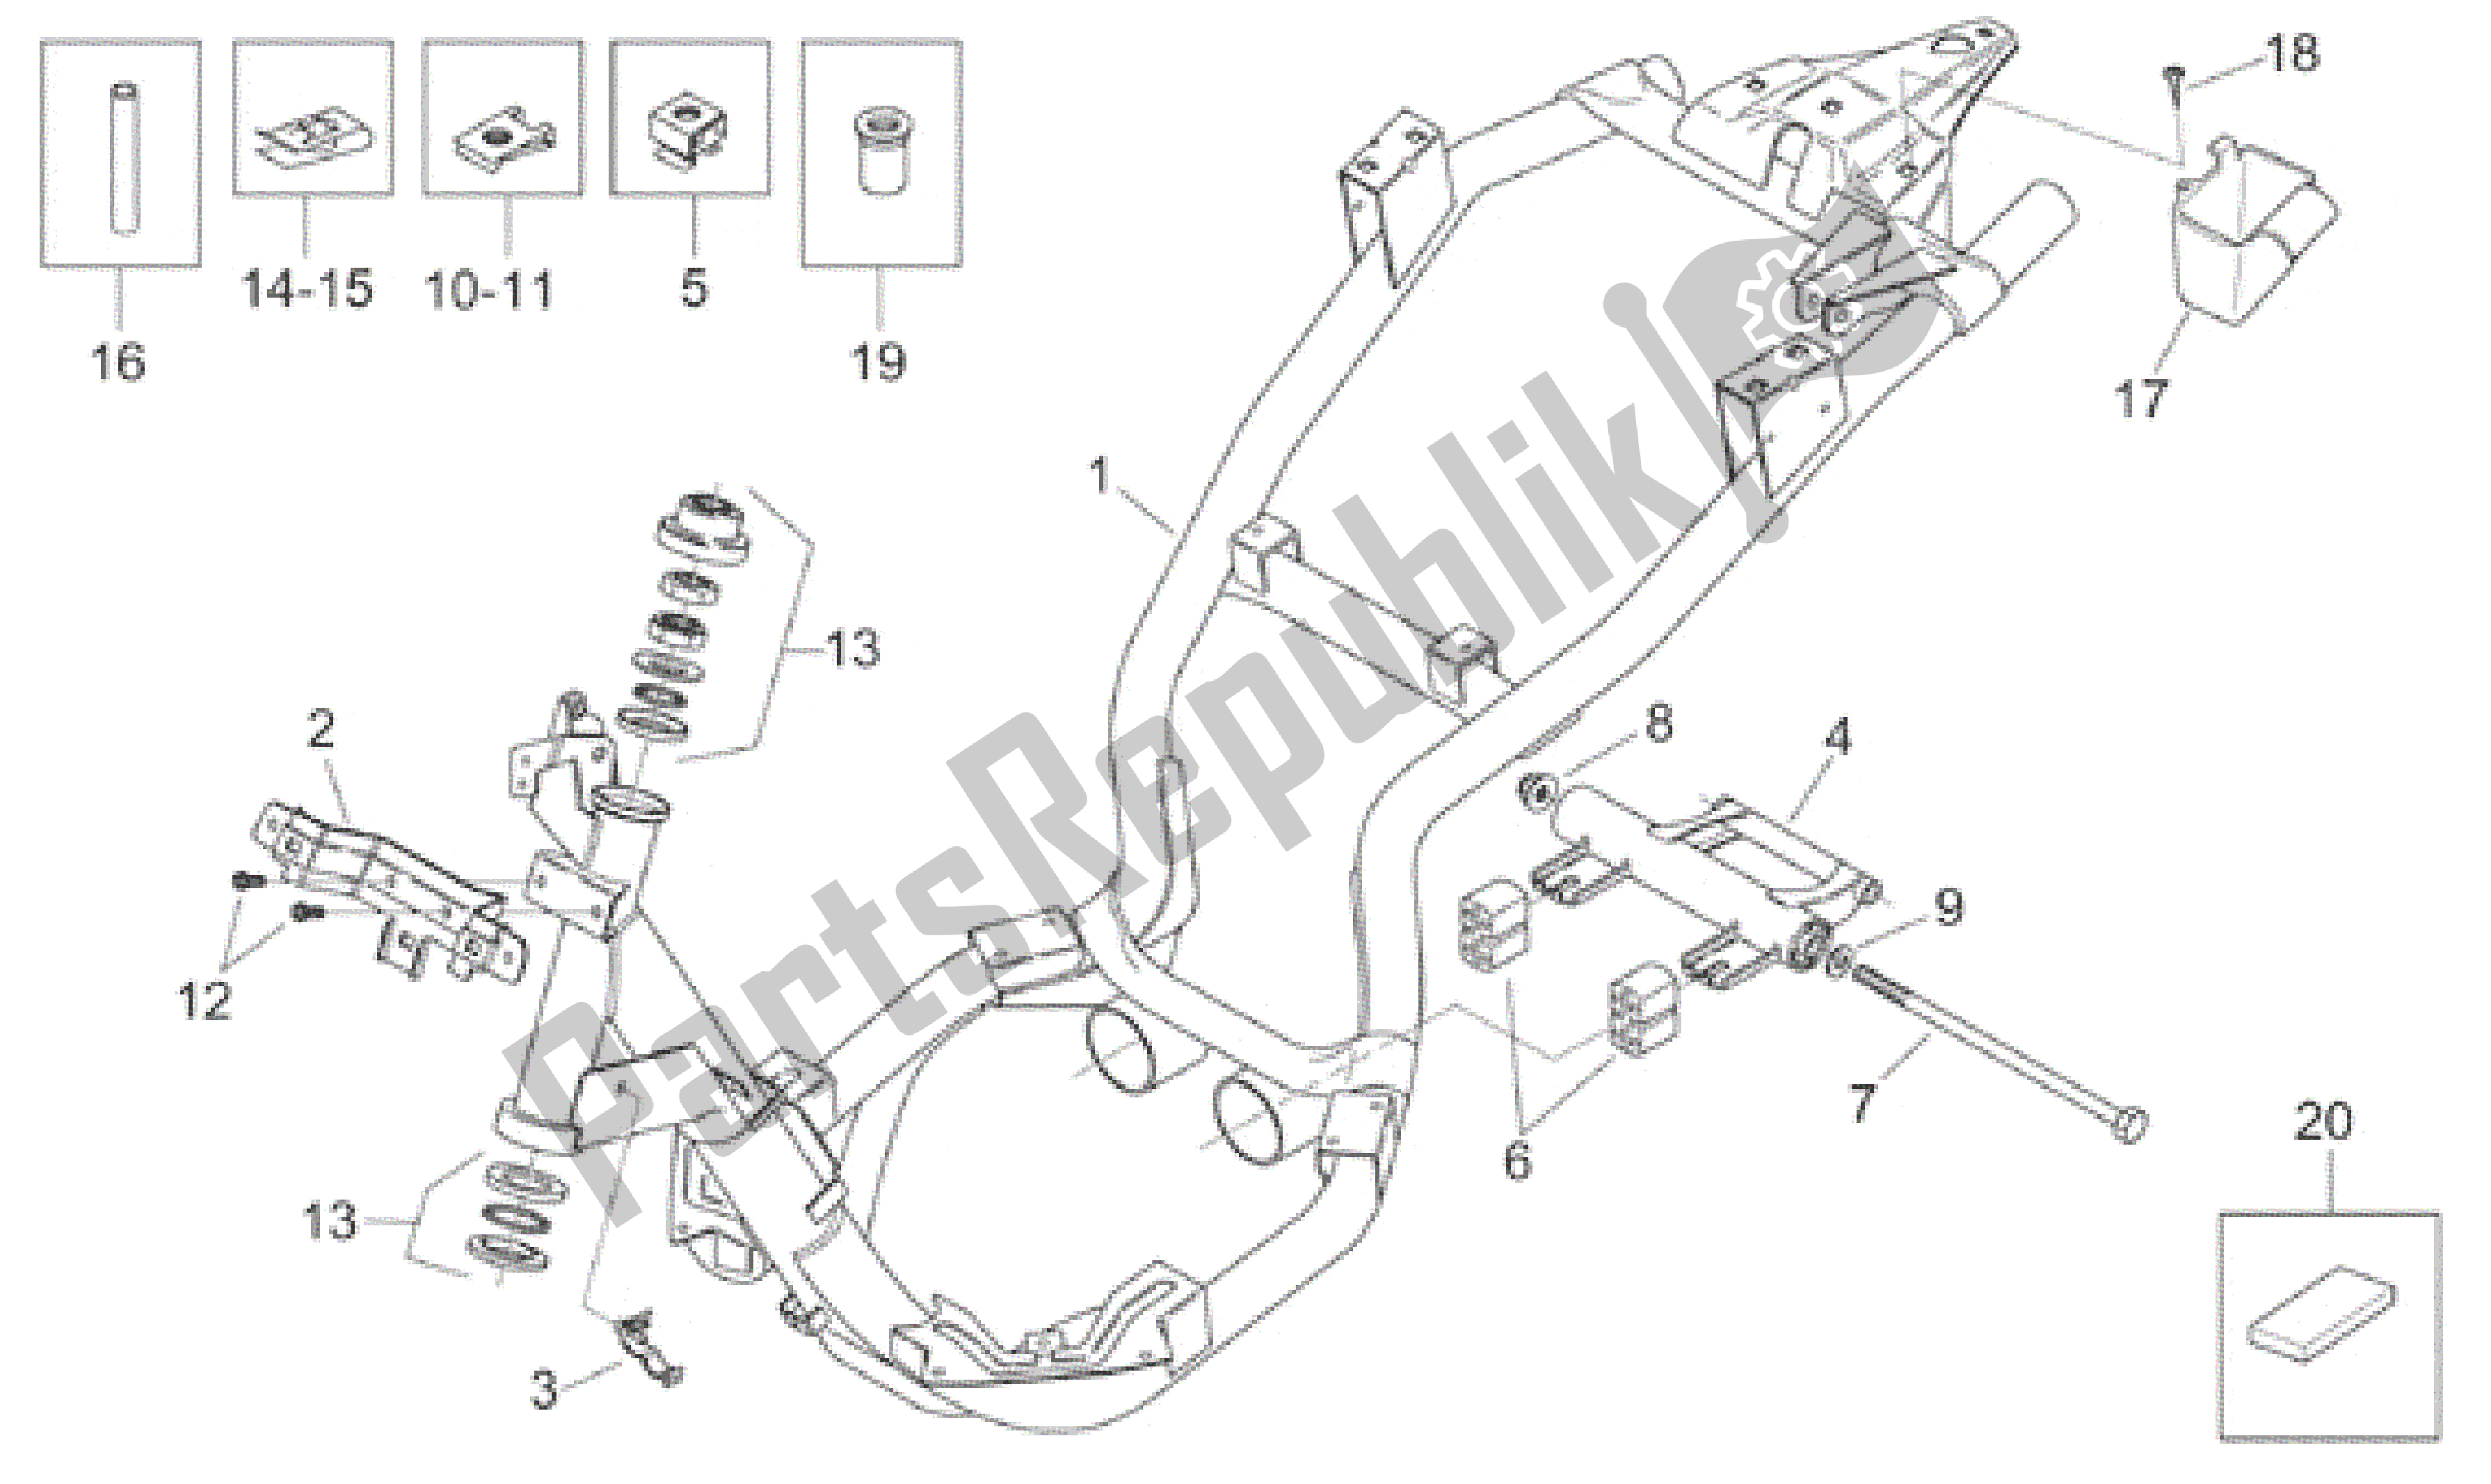 All parts for the Frame of the Aprilia Habana 50 1999 - 2001